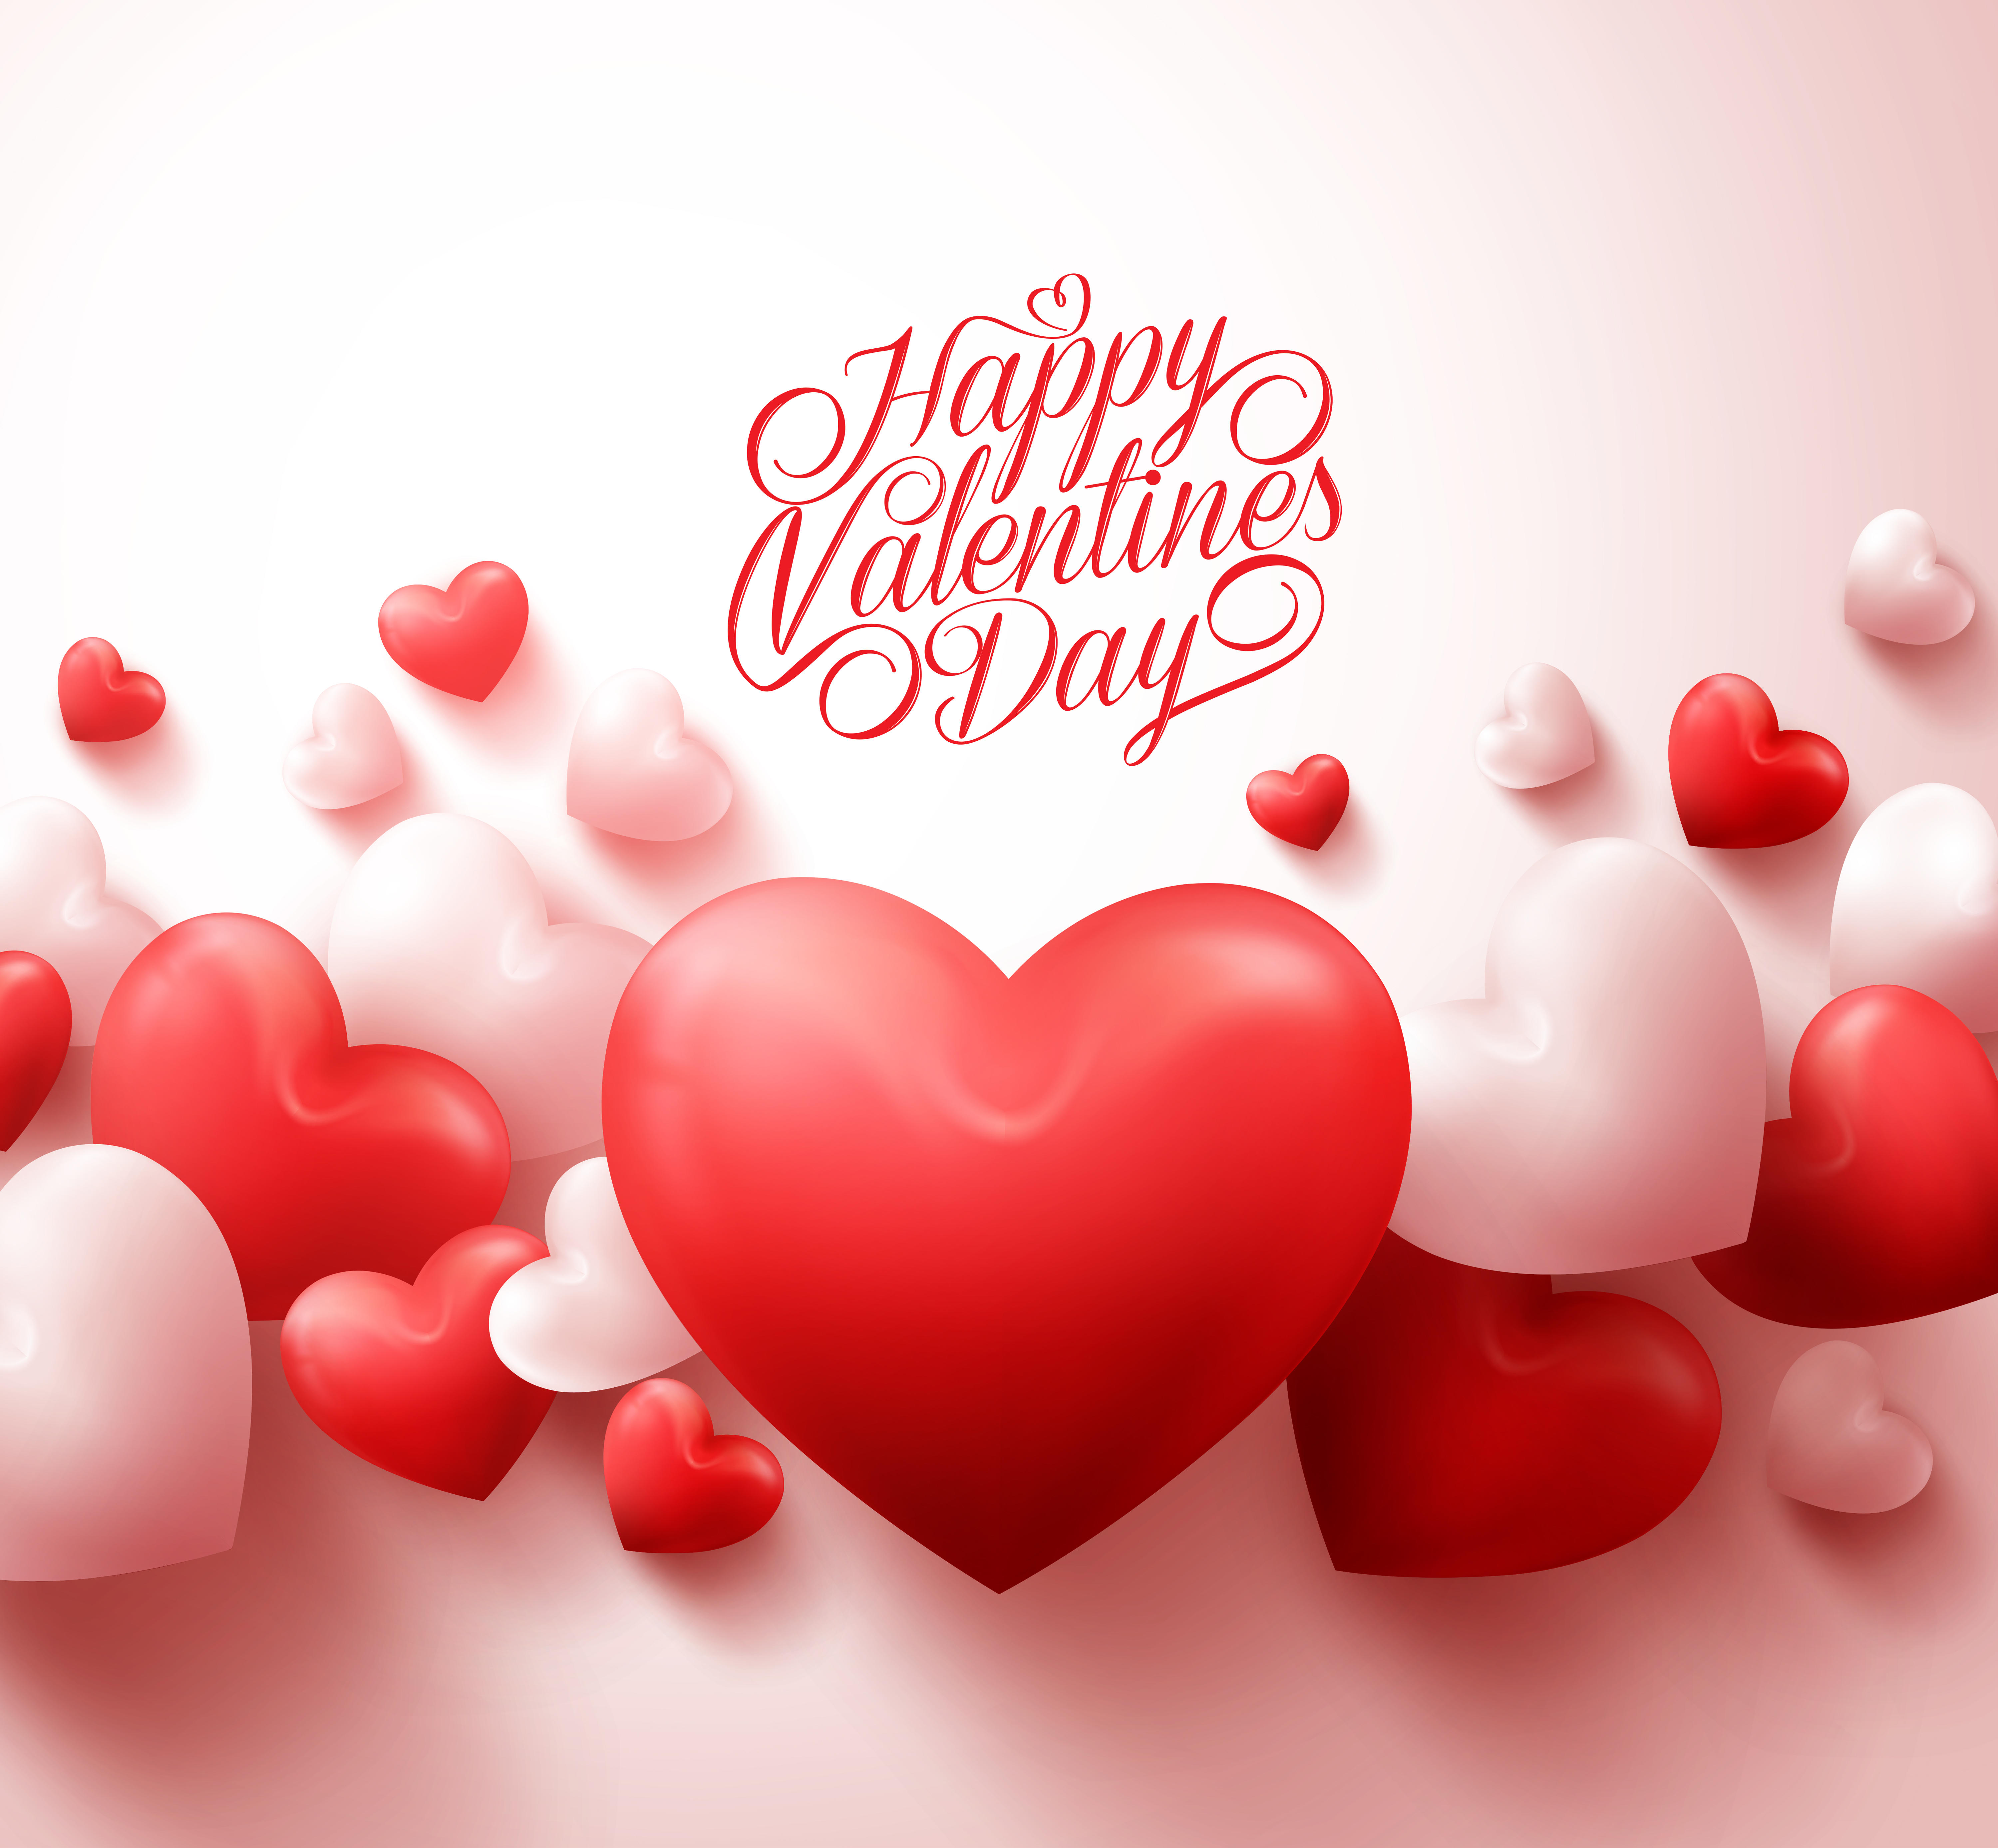 Wallpapers Valentine s Day Romantic Hearts Hearts on the desktop